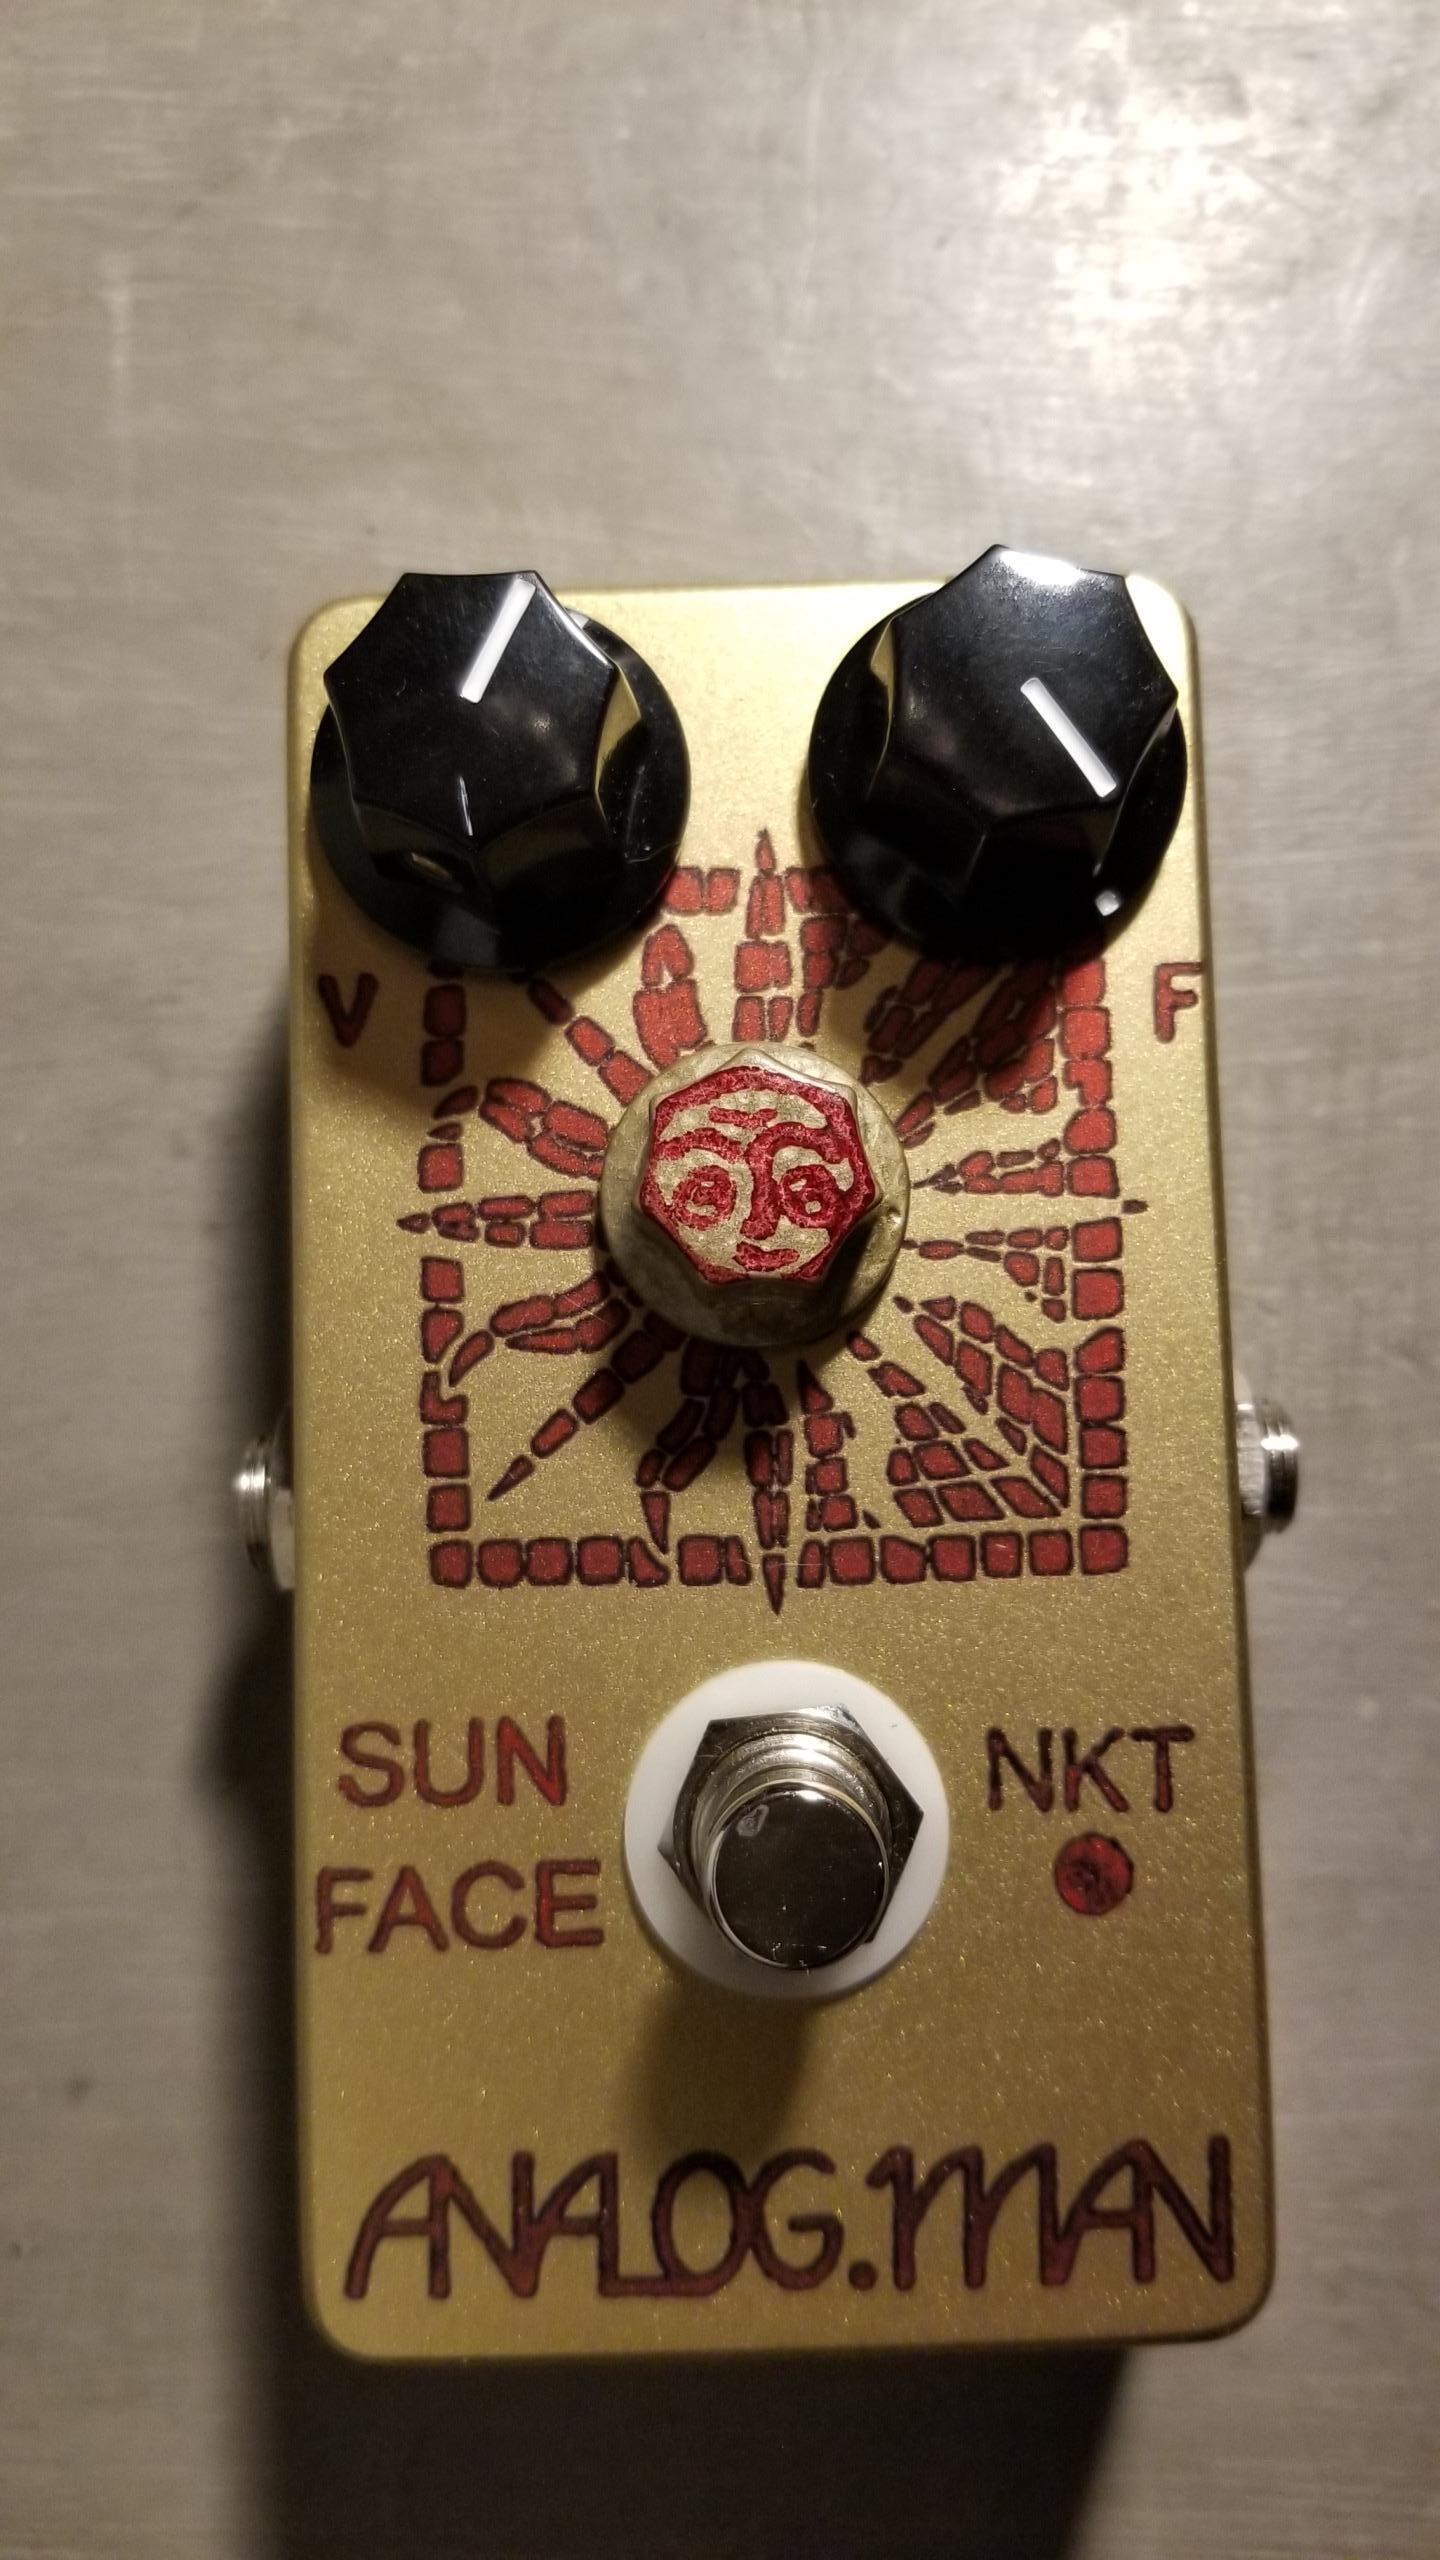 Used Analogman Sun Face Fuzz Pedal NKT red dot